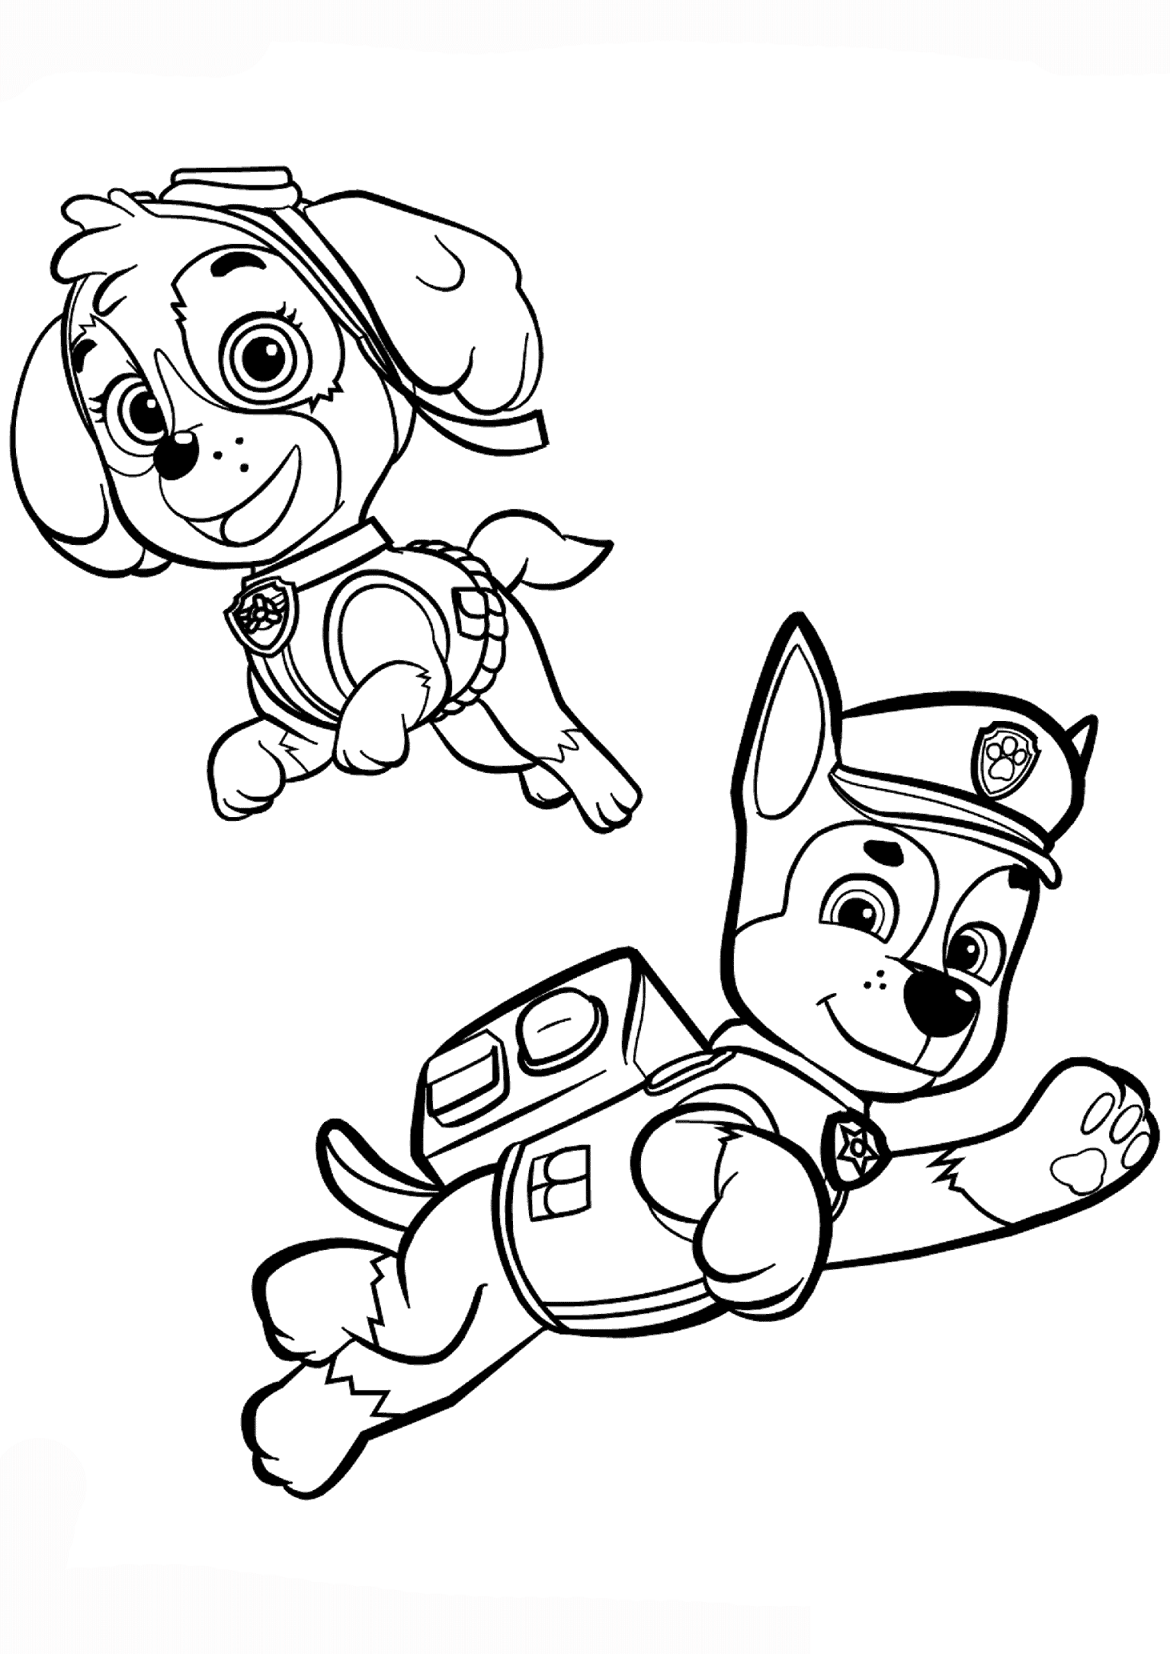 Click to see printable version of Chase y Skye Coloring page